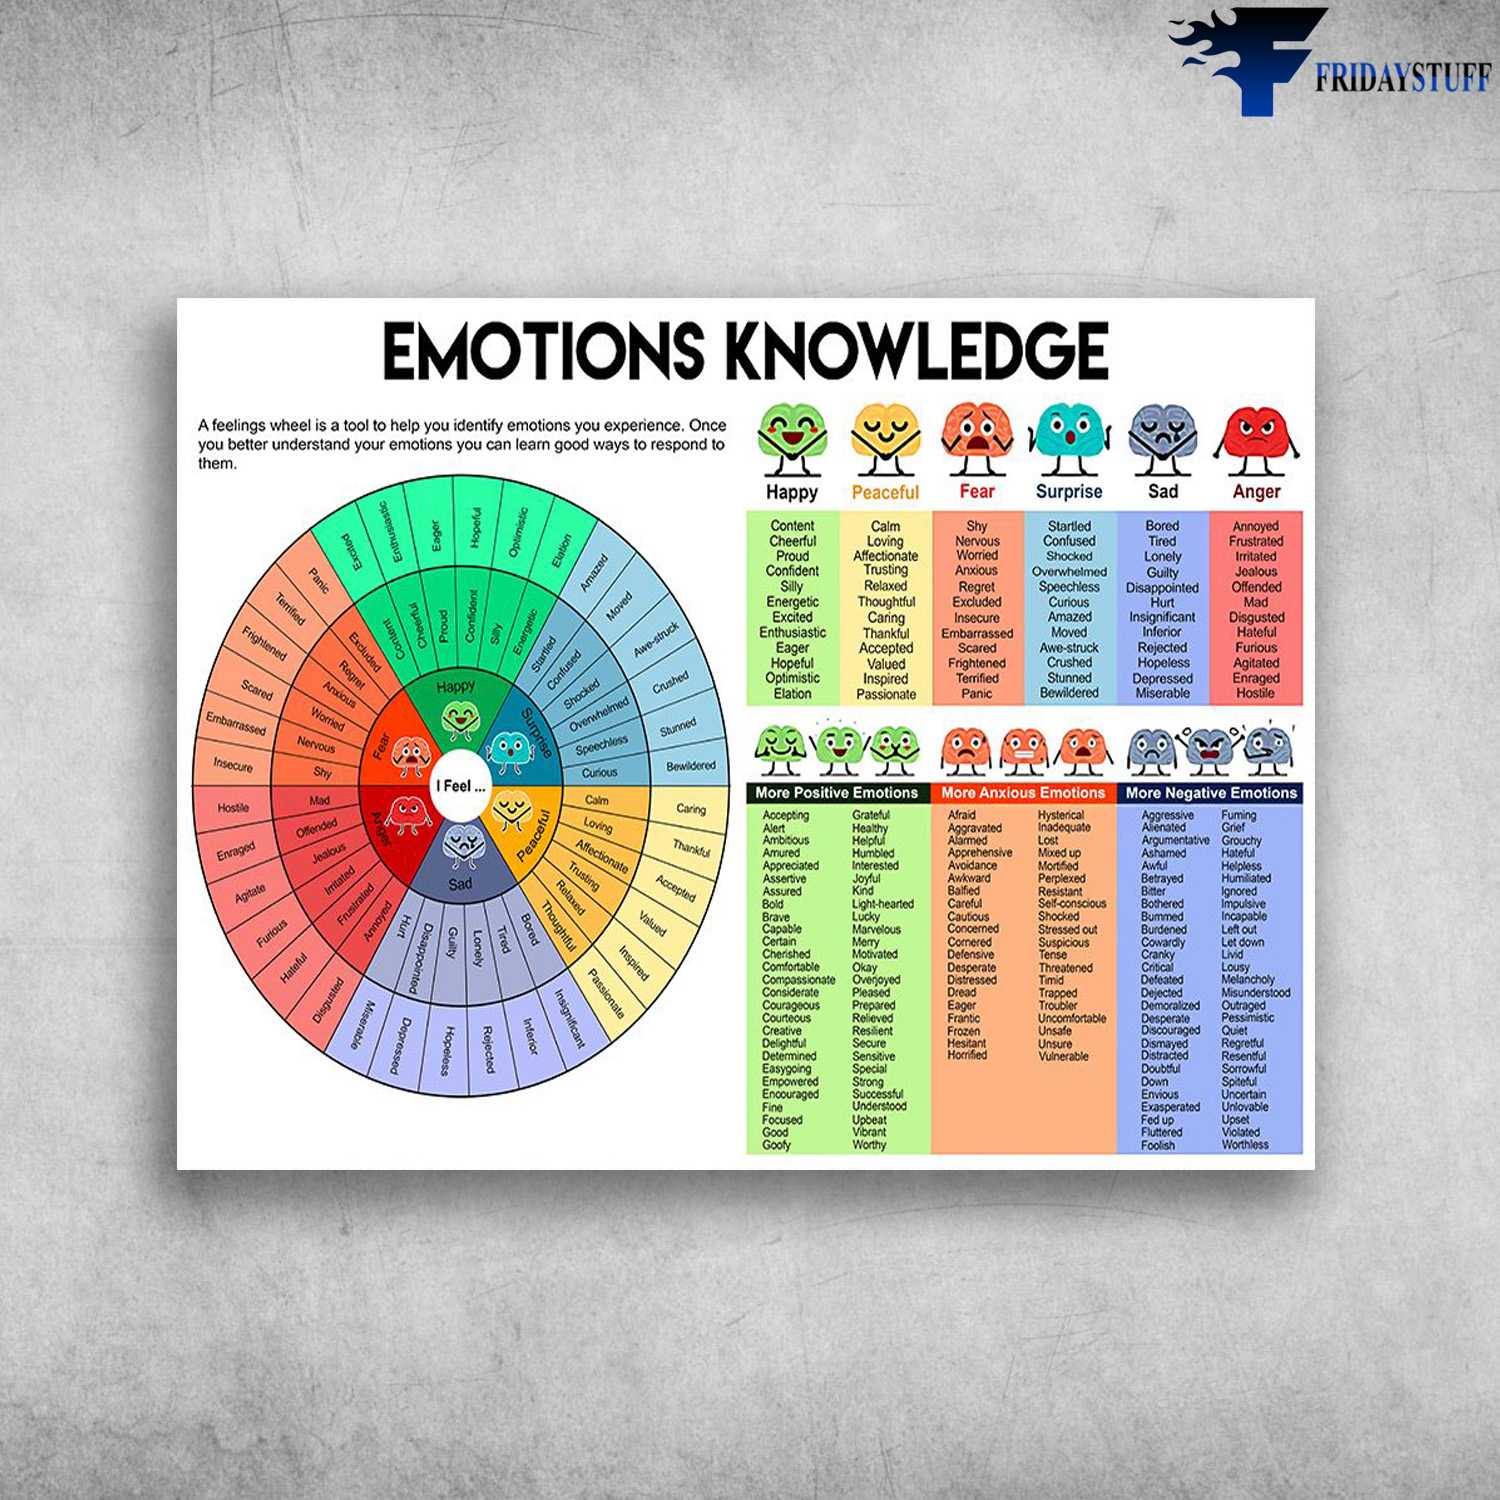 Emotions Knowledge - Happy, Peaceful, Fear, Surprise, Sad, Anger, More Positive Emotions